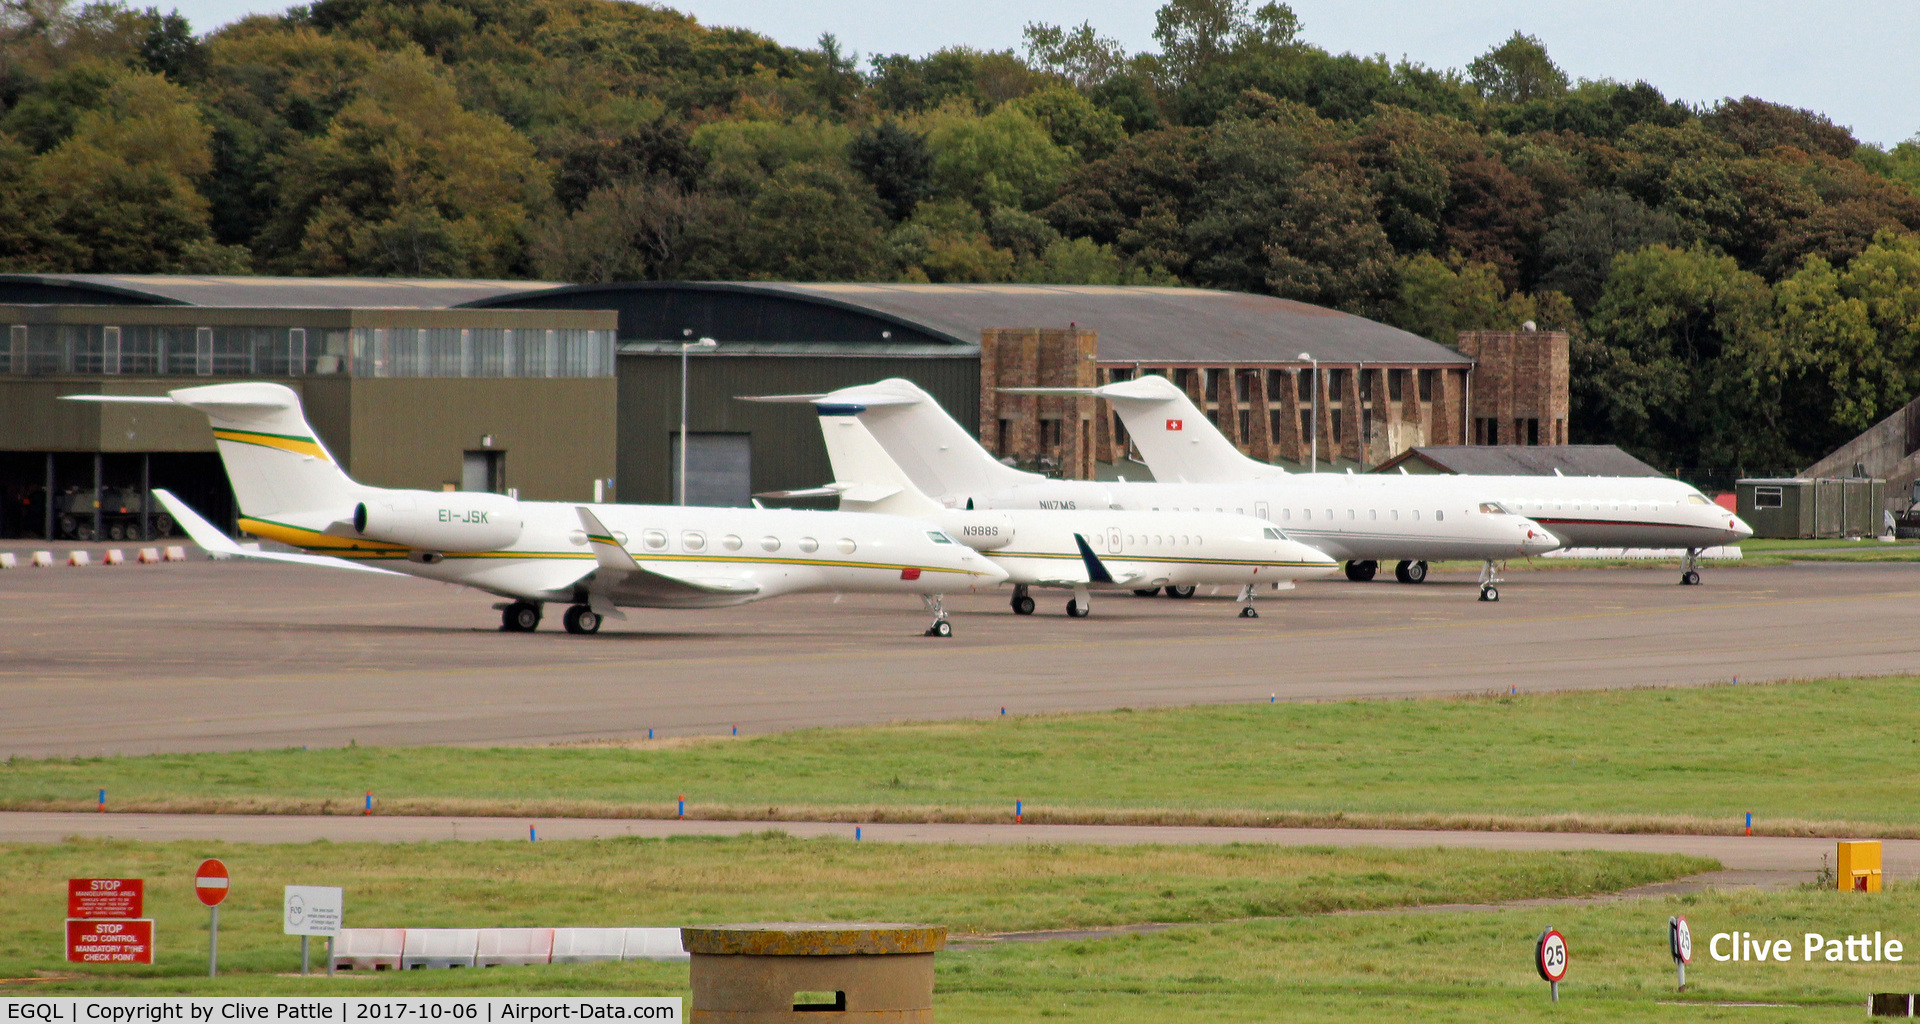 RAF Leuchars Airport, Leuchars, Scotland United Kingdom (EGQL) - GA line-up at Leuchars for the Dundee Links Golf Championships at nearby St Andrews.